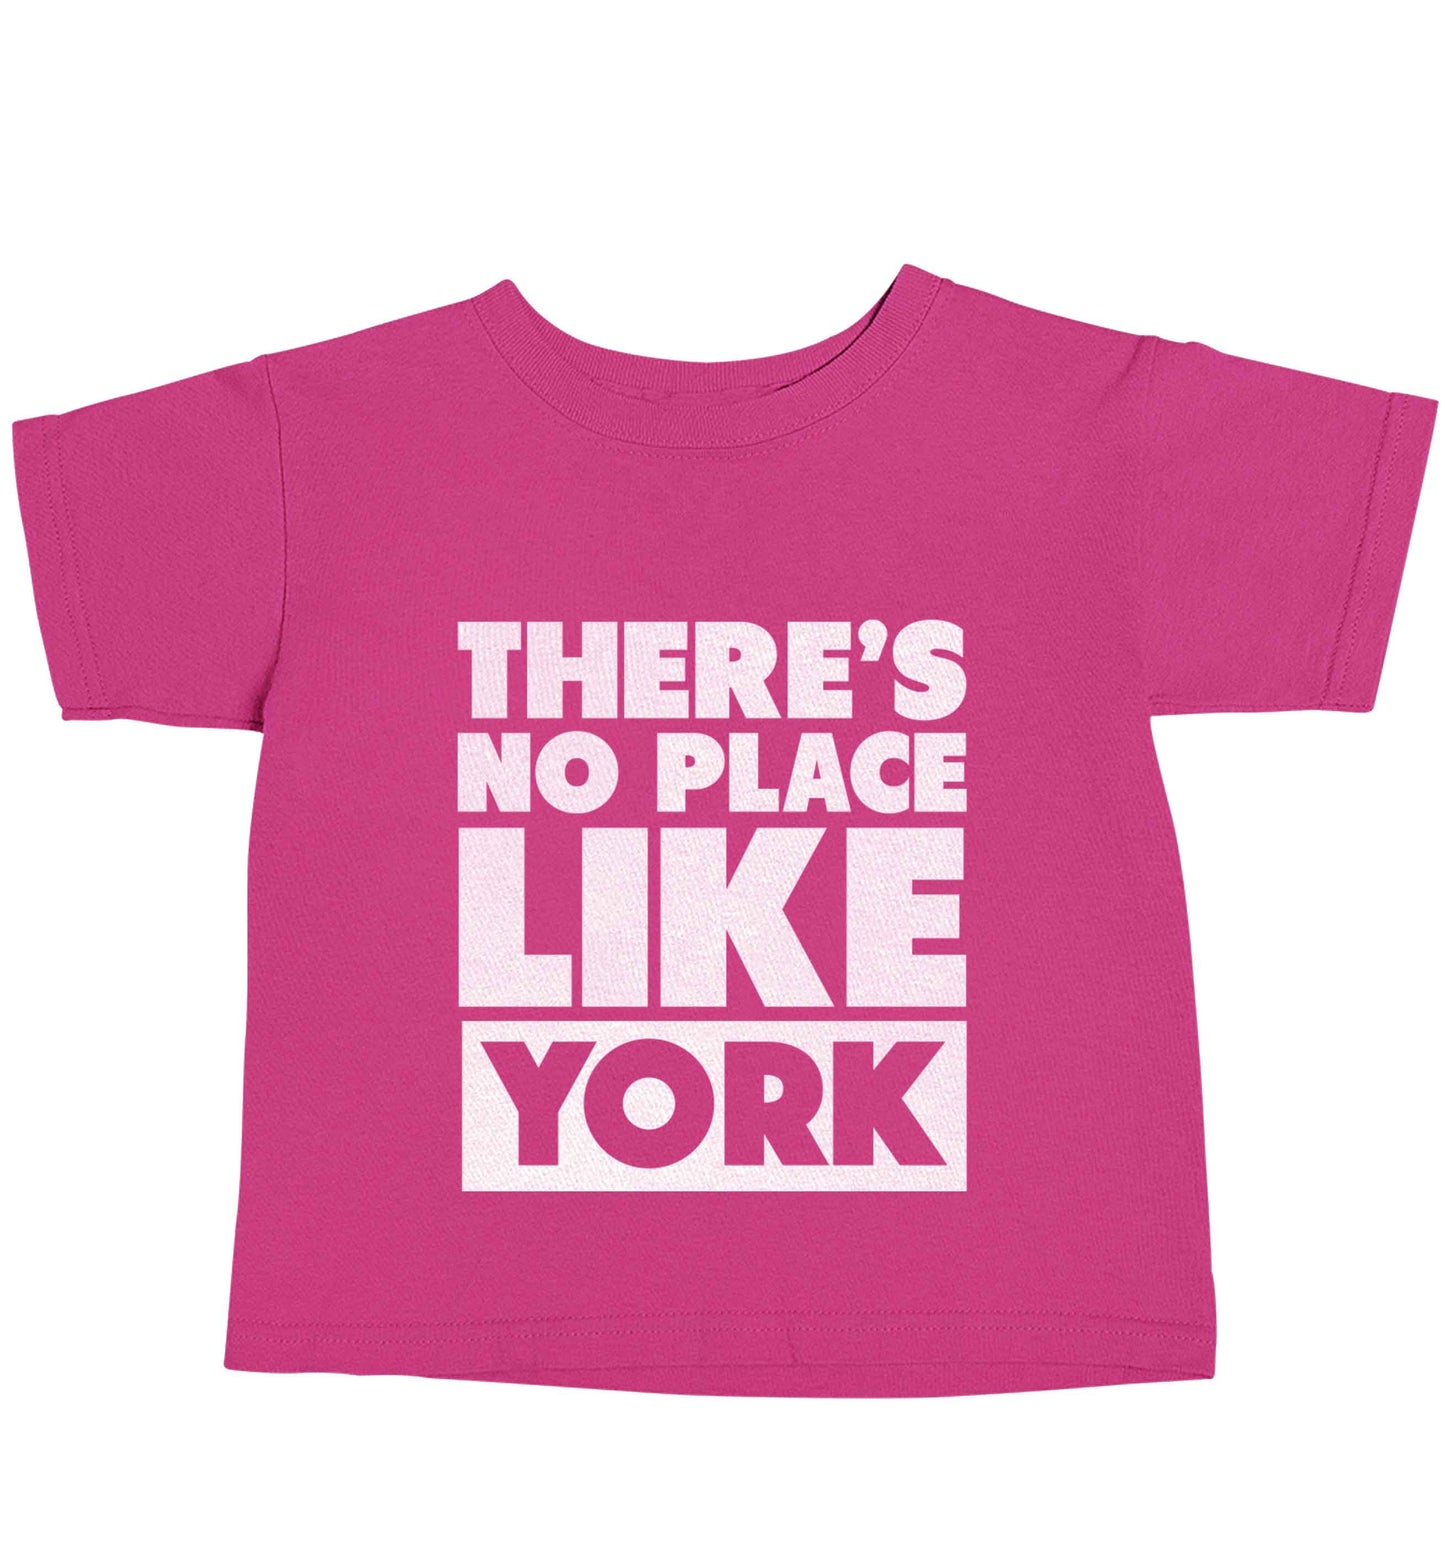 There's no place like york pink baby toddler Tshirt 2 Years